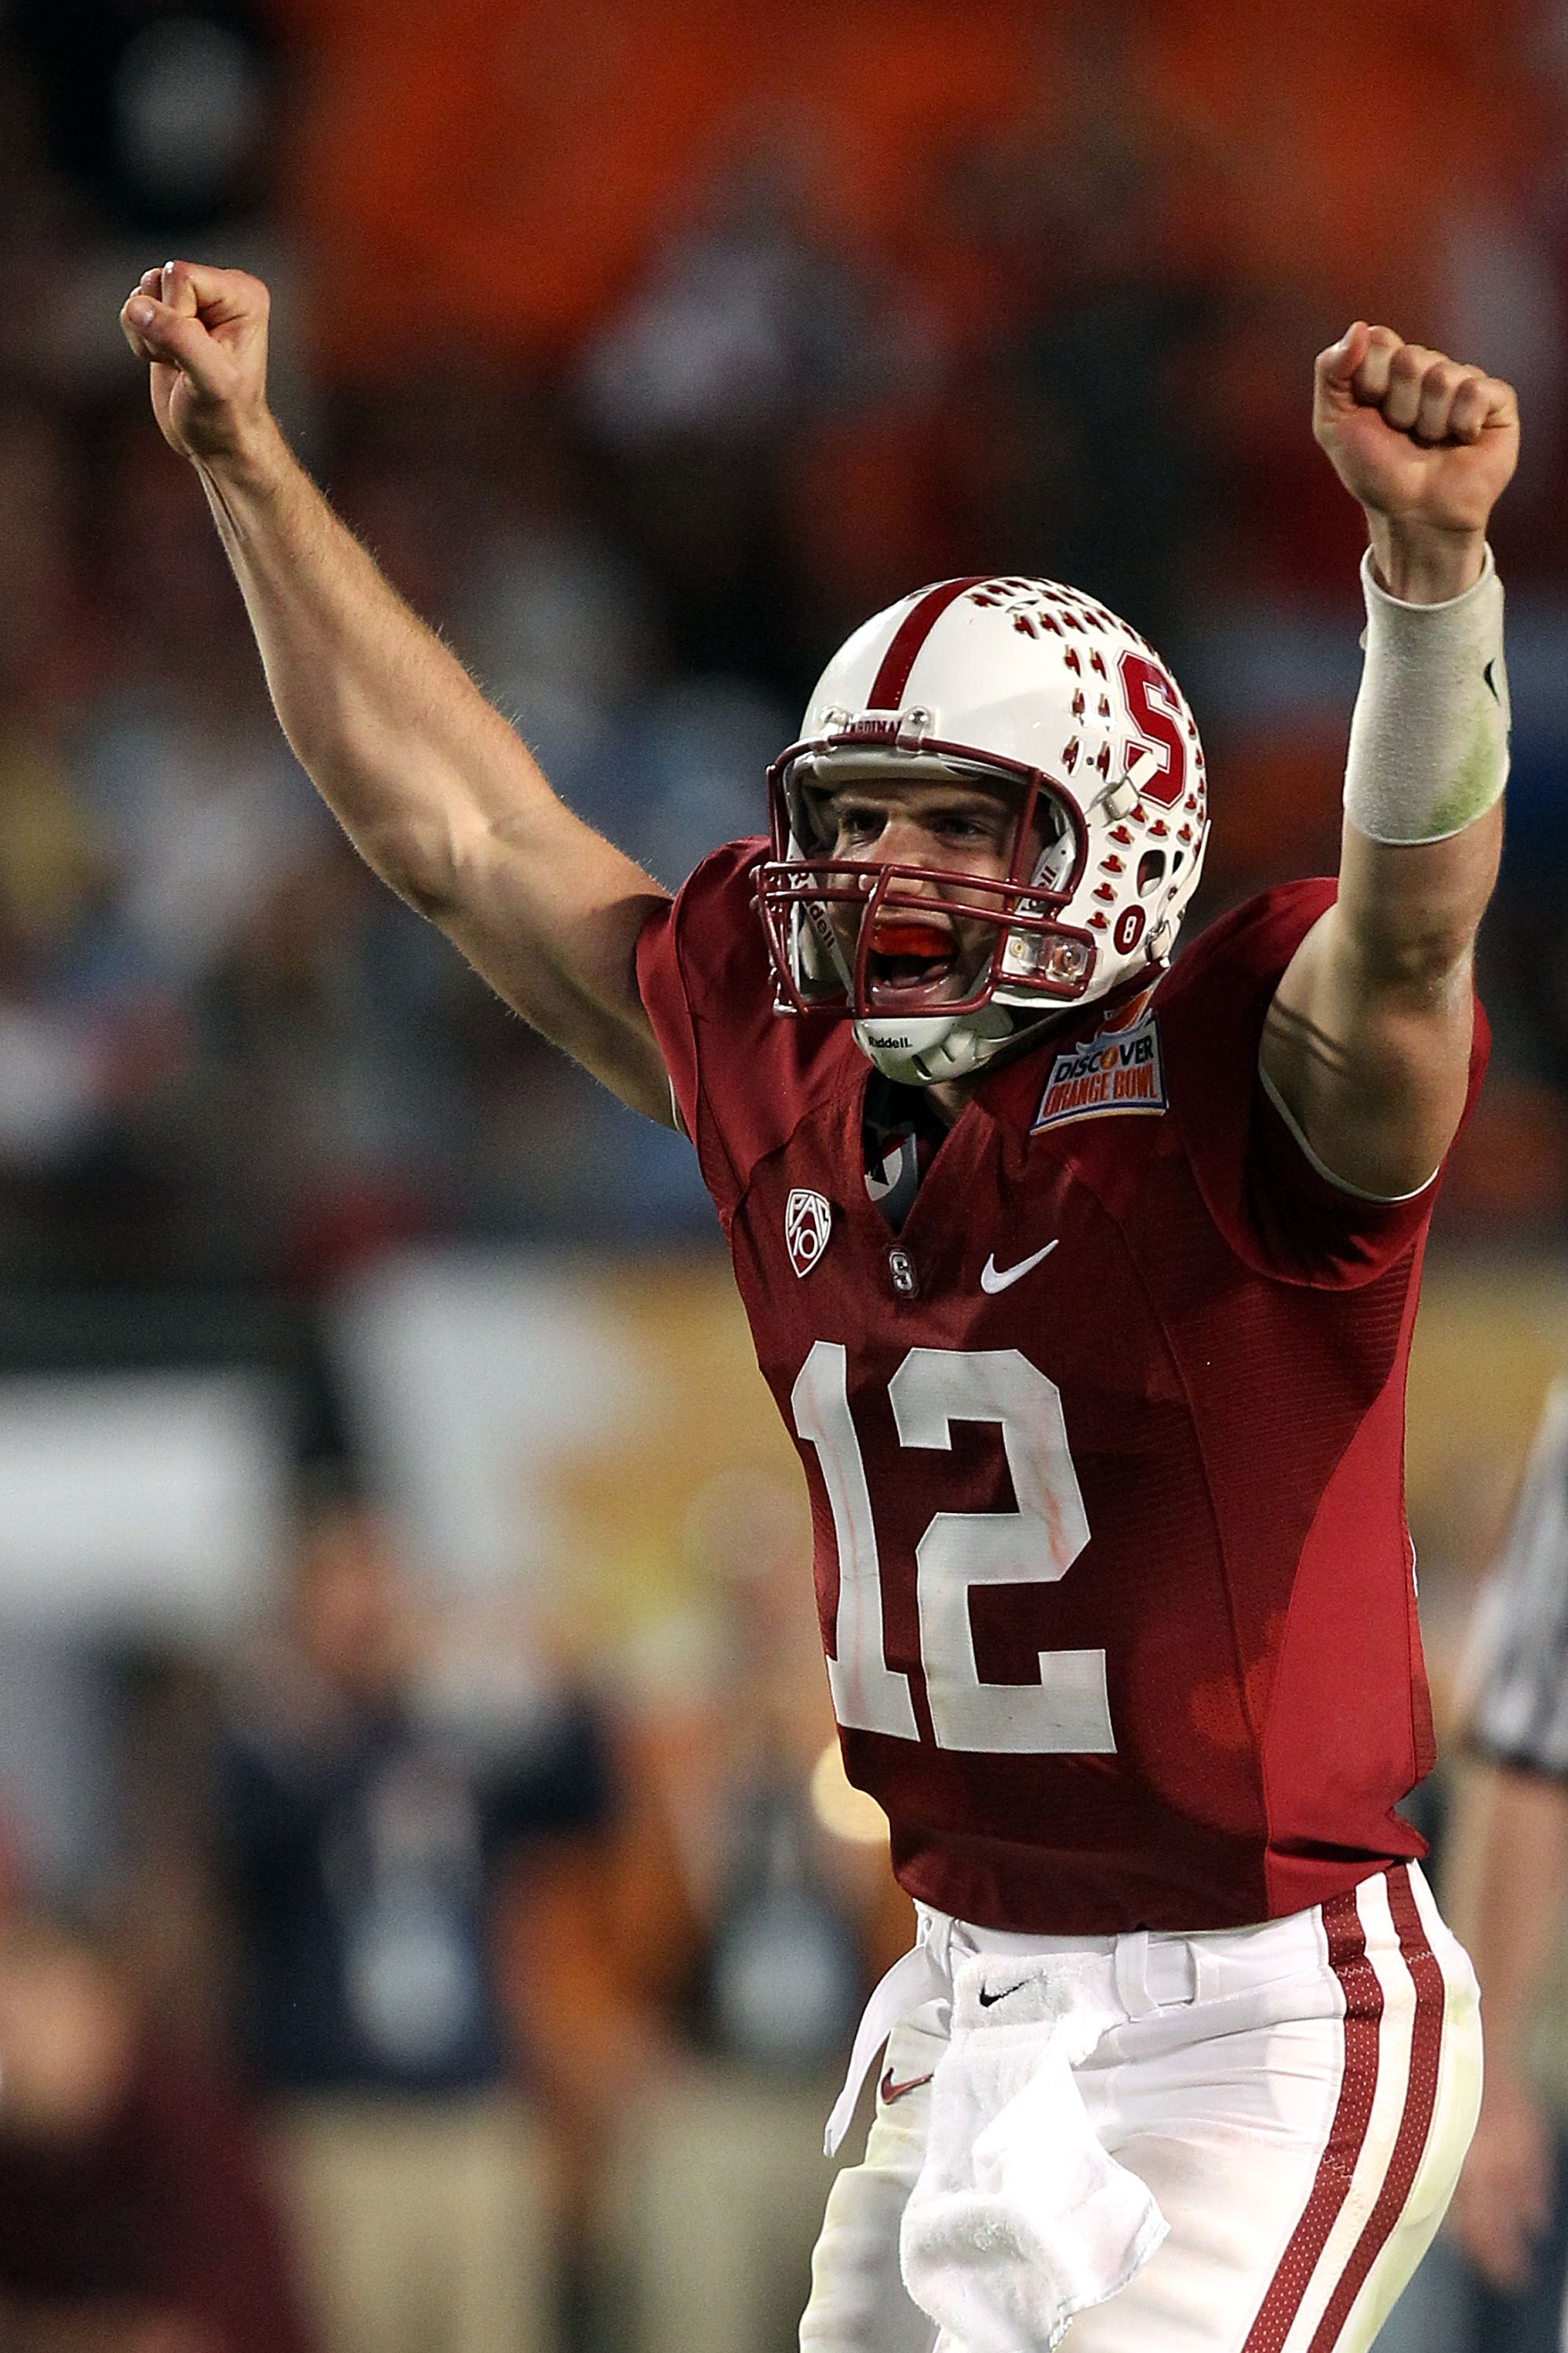 MIAMI, FL - JANUARY 03:  Andrew Luck #12 of the Stanford Cardinal celebrates after he threw a 38-yard touchdown pass in the fourth quarter against the Virginai Tech Hokies during the 2011 Discover Orange Bowl at Sun Life Stadium on January 3, 2011 in Miam